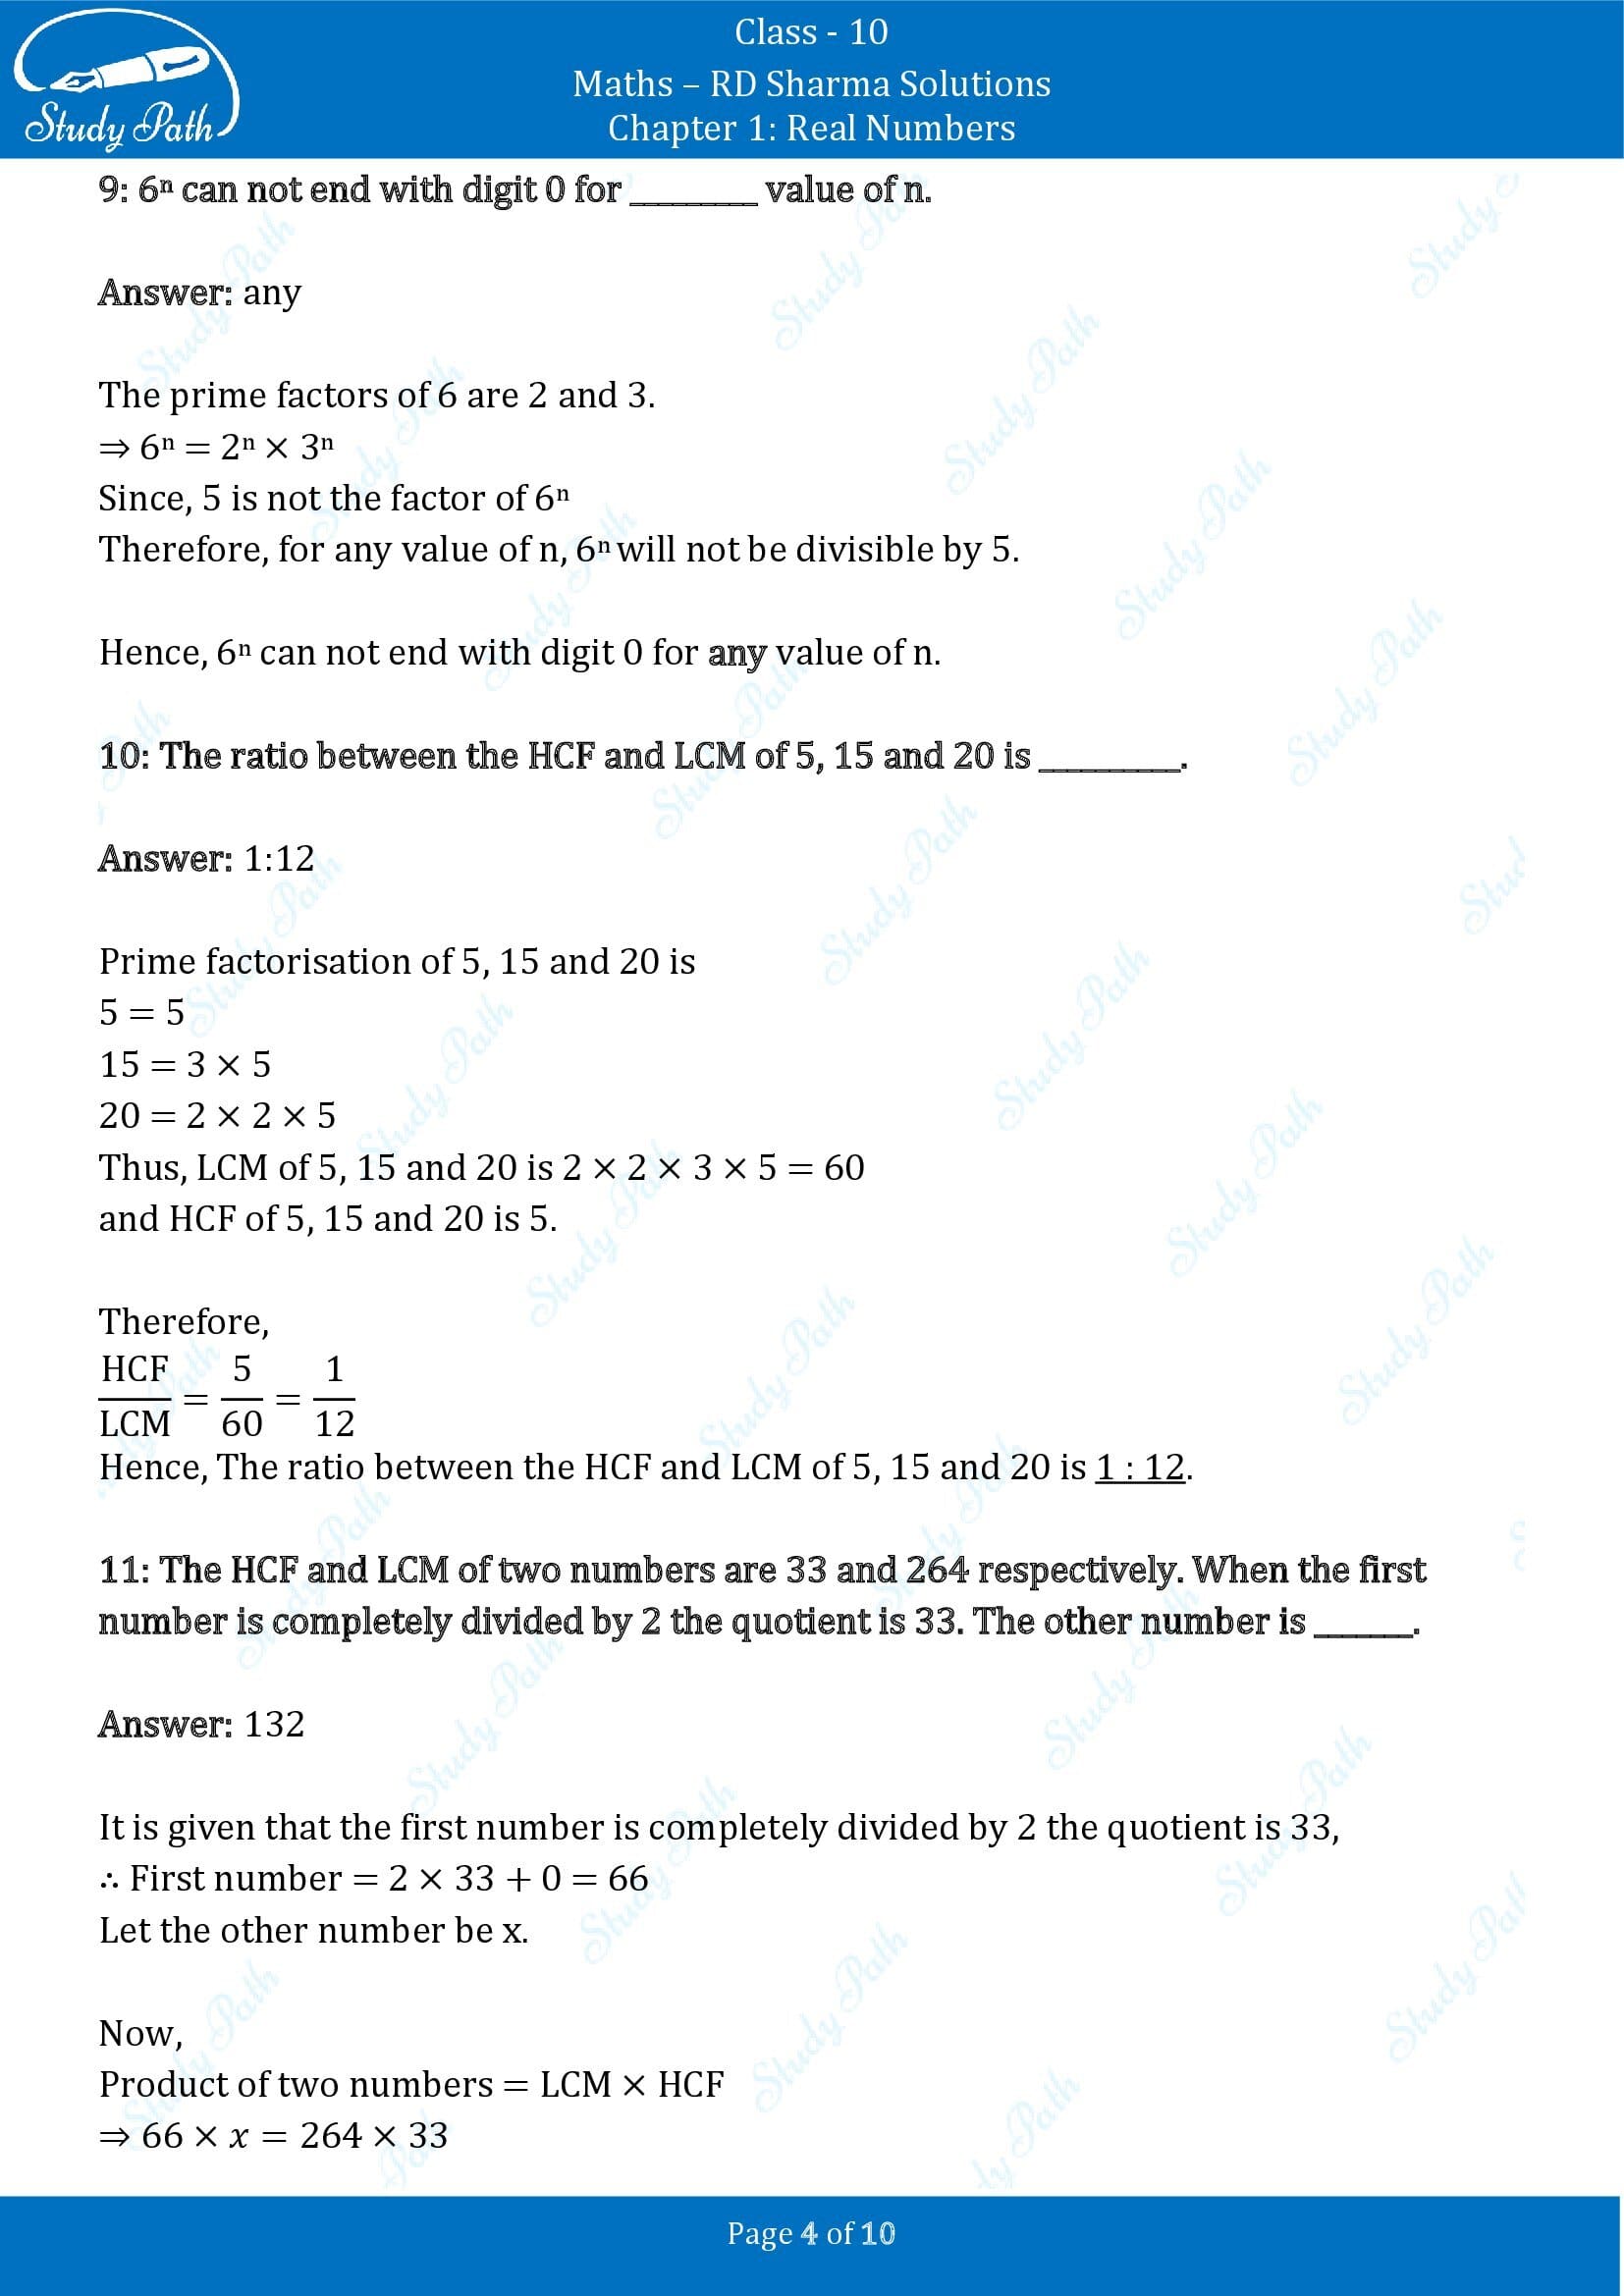 RD Sharma Solutions Class 10 Chapter 1 Real Numbers Fill in the Blank Type Questions FBQs 00004